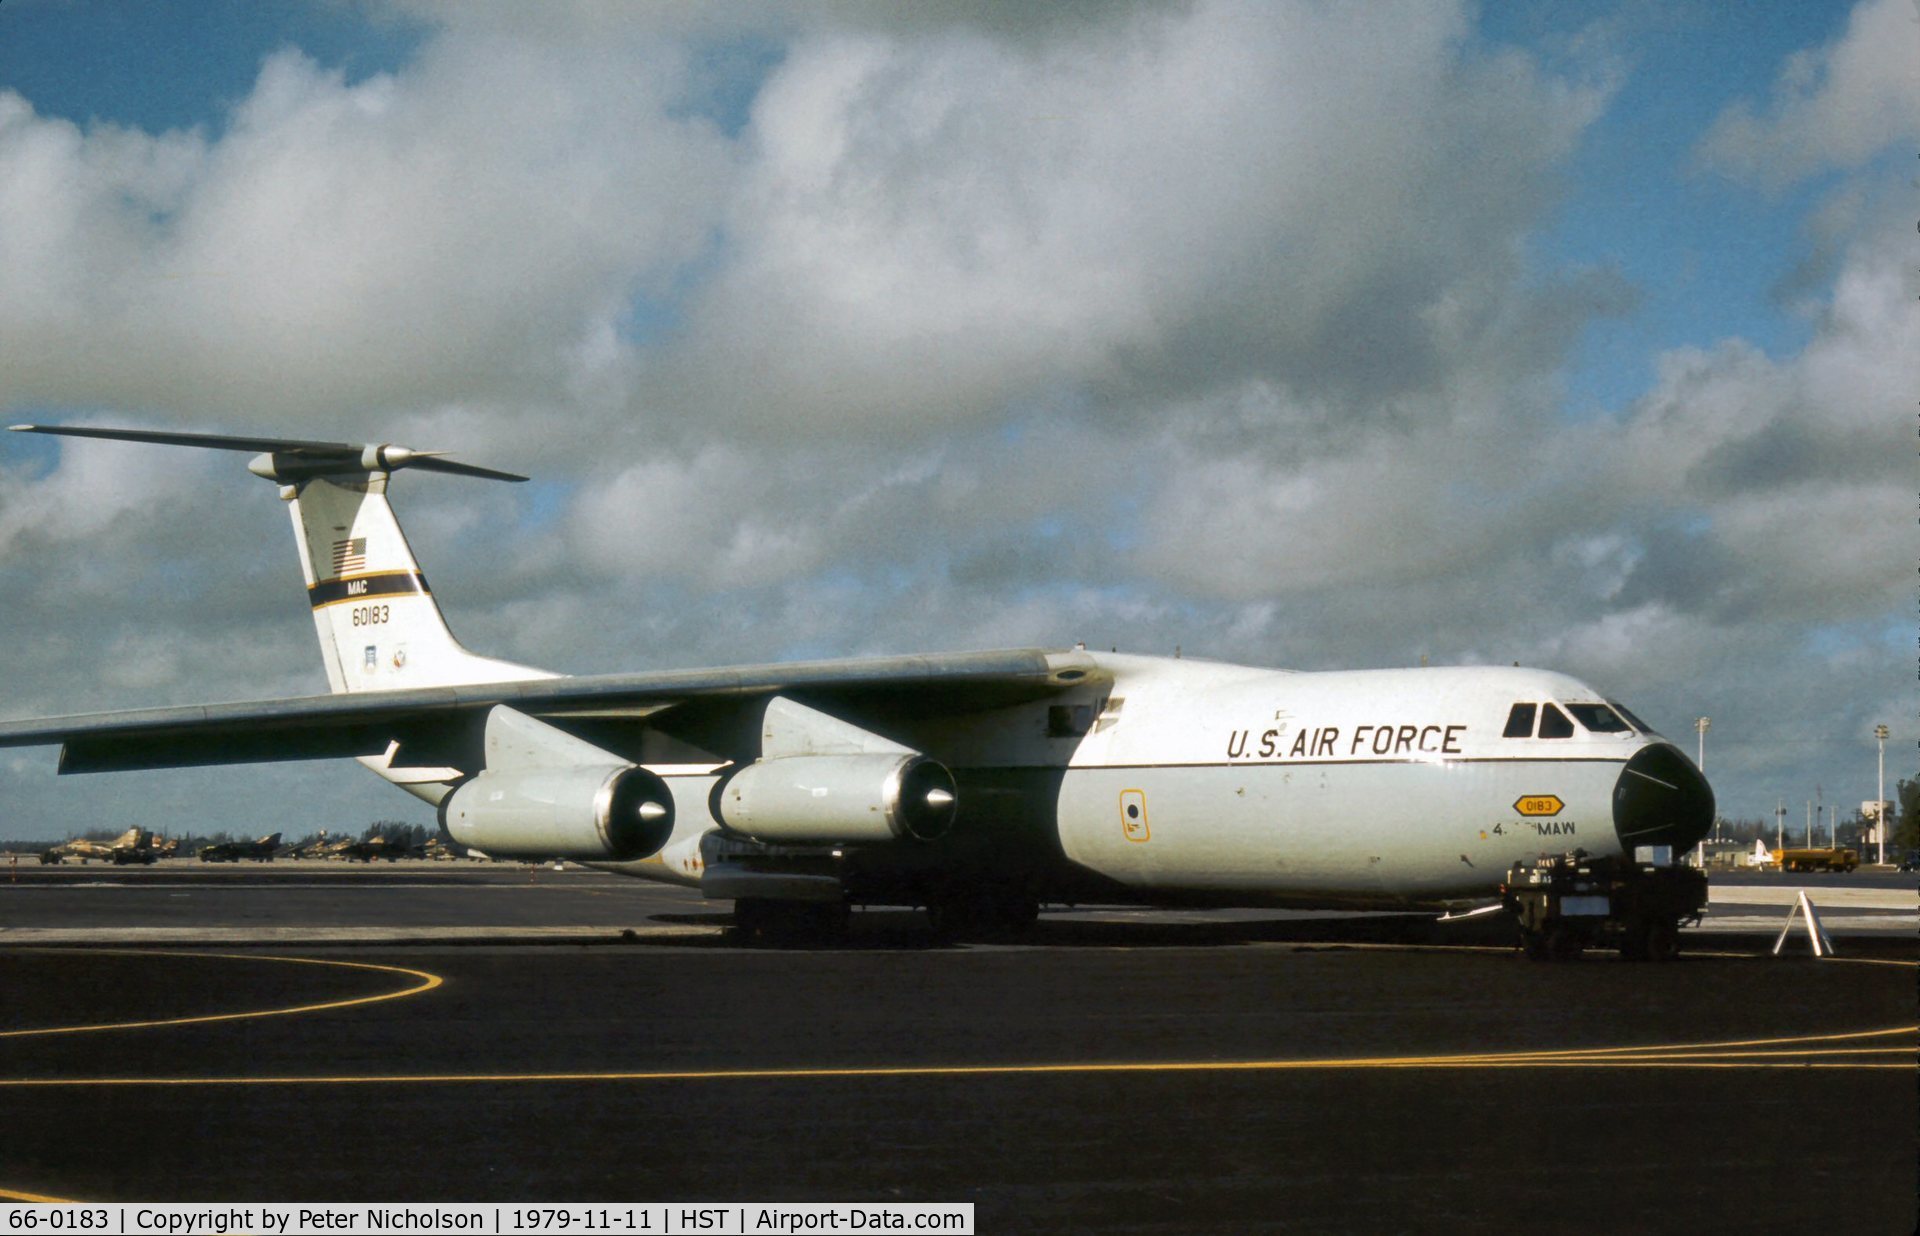 66-0183, 1966 Lockheed C-141A Starlifter C/N 300-6209, C-141A Starlifter of 438th Military Airlift Wing at the 1979 Homestead AFB Open House.